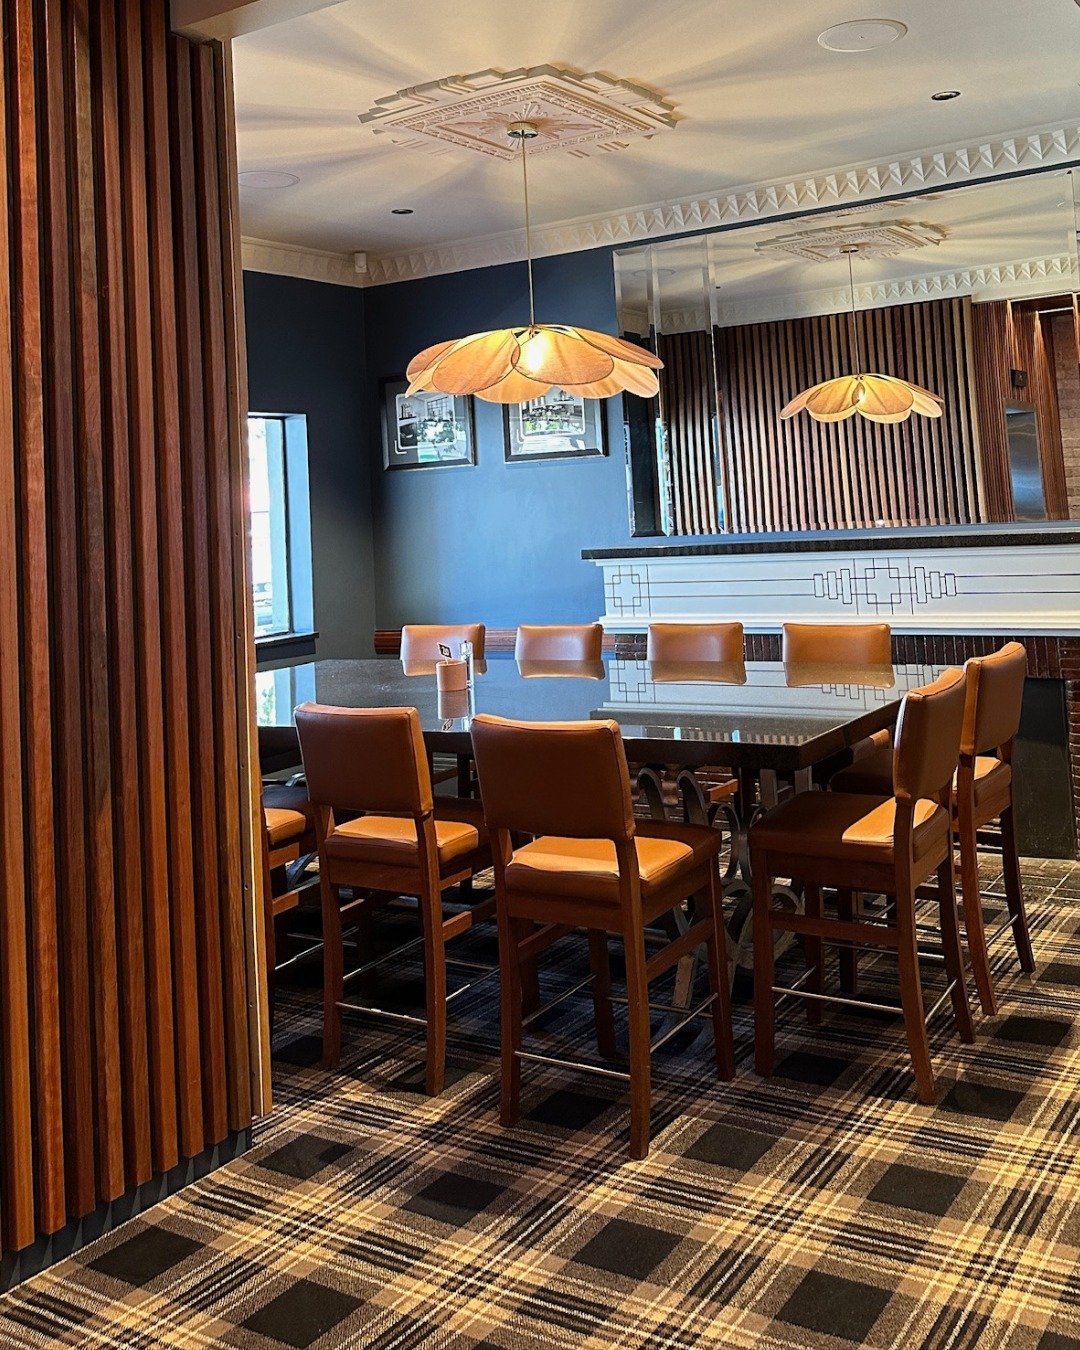 Contemporary sophistication and traditional charm at Torrensville&rsquo;s Hotel Royal.

Project: @hotelroyal.torrensville
Architects: @studios2arch
Builders: @pascaleconstruction
Carpet: @signature_carpets
Pendants: @greenhouseinteriors

#InteriorDes